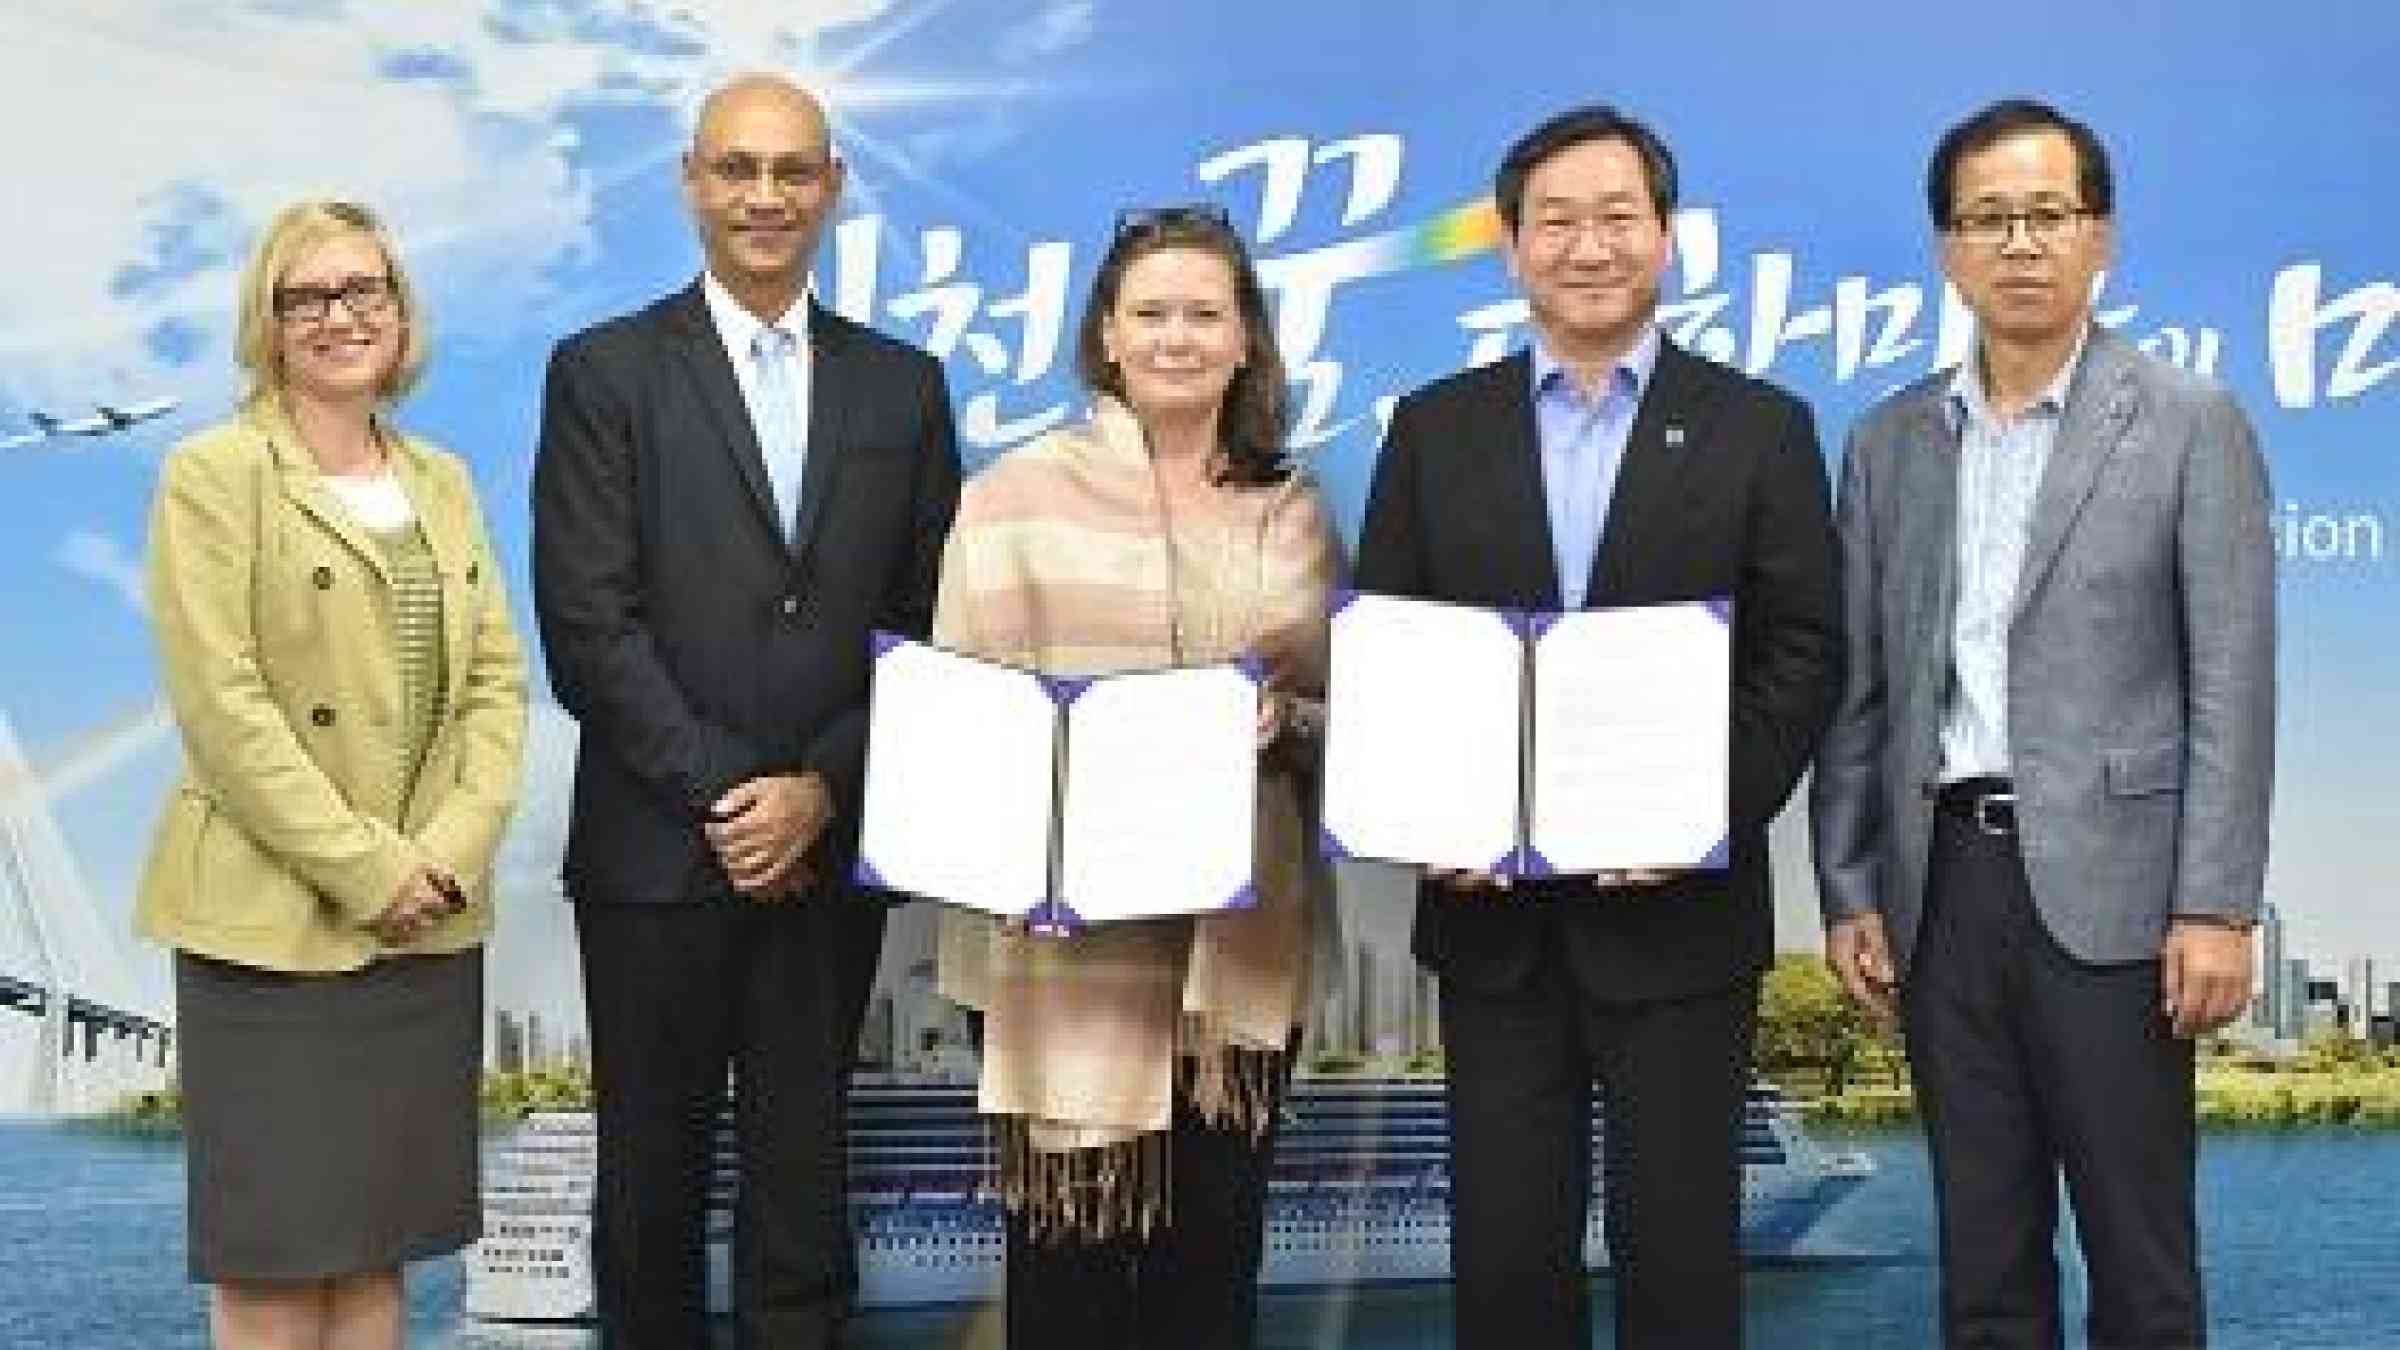 Displaying the signed agreement between UNISDR, the Ministry of Public Safety and Security and Incheon Metropolitan City are (from left to right) Sarah Wade-Apicella and Sanjaya Bhatia of UNISDR ONEA-GETI, UNISDR Director Kirsi Madi, Mayor Yoo Jeong-bok and Kim Dong-Bin, Director-General of Disaster & Safety Headquarters of Incheon Metropolitan City.